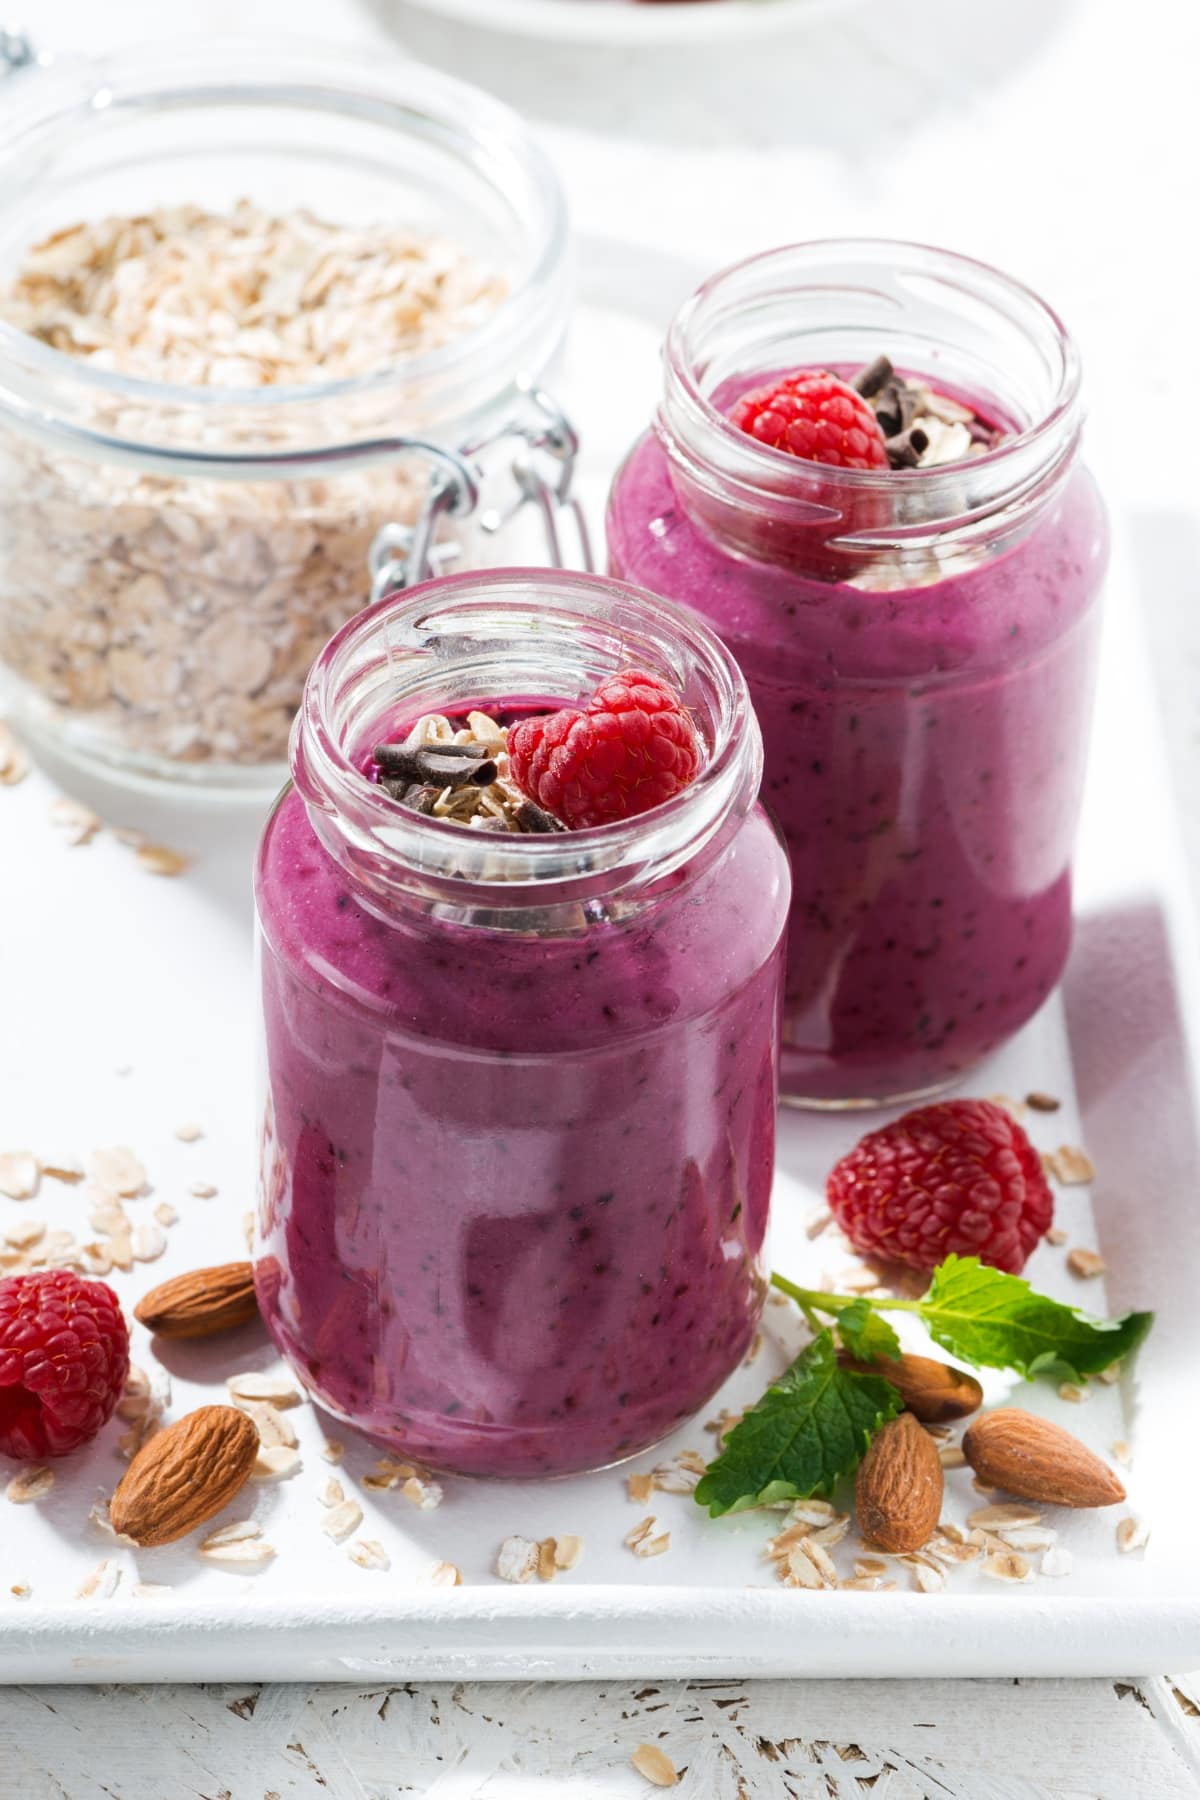 25 Easy Vitamix Smoothie Recipes To Try featuring Homemade Vitamix Raspberry Smoothies in Jars with Granola and Fresh Raspberries